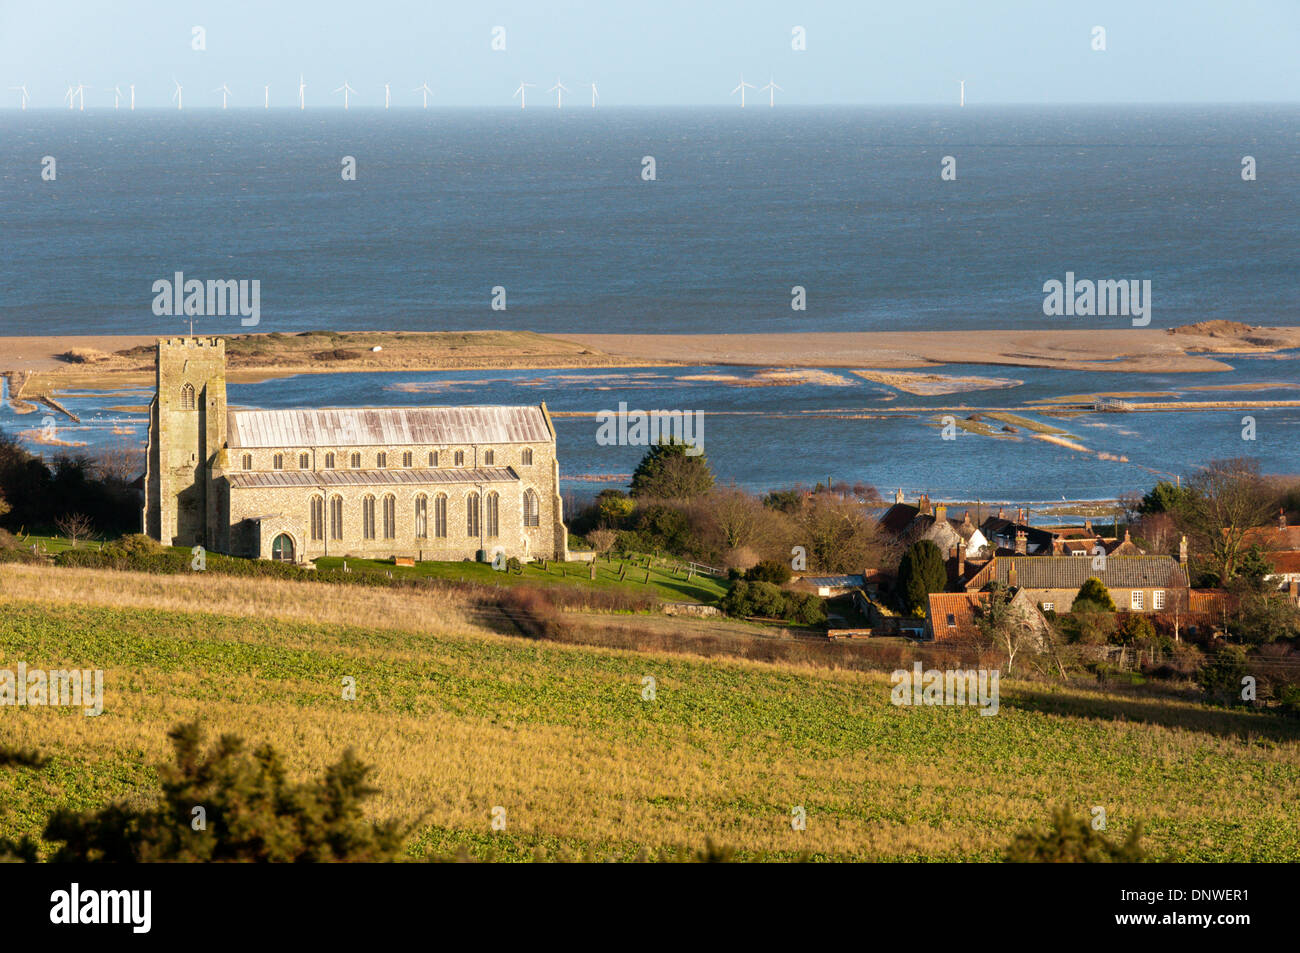 Salthouse St Nicholas church in front of flooded saltmarshes with Sheringham Shoal windfarm on horizon. Stock Photo